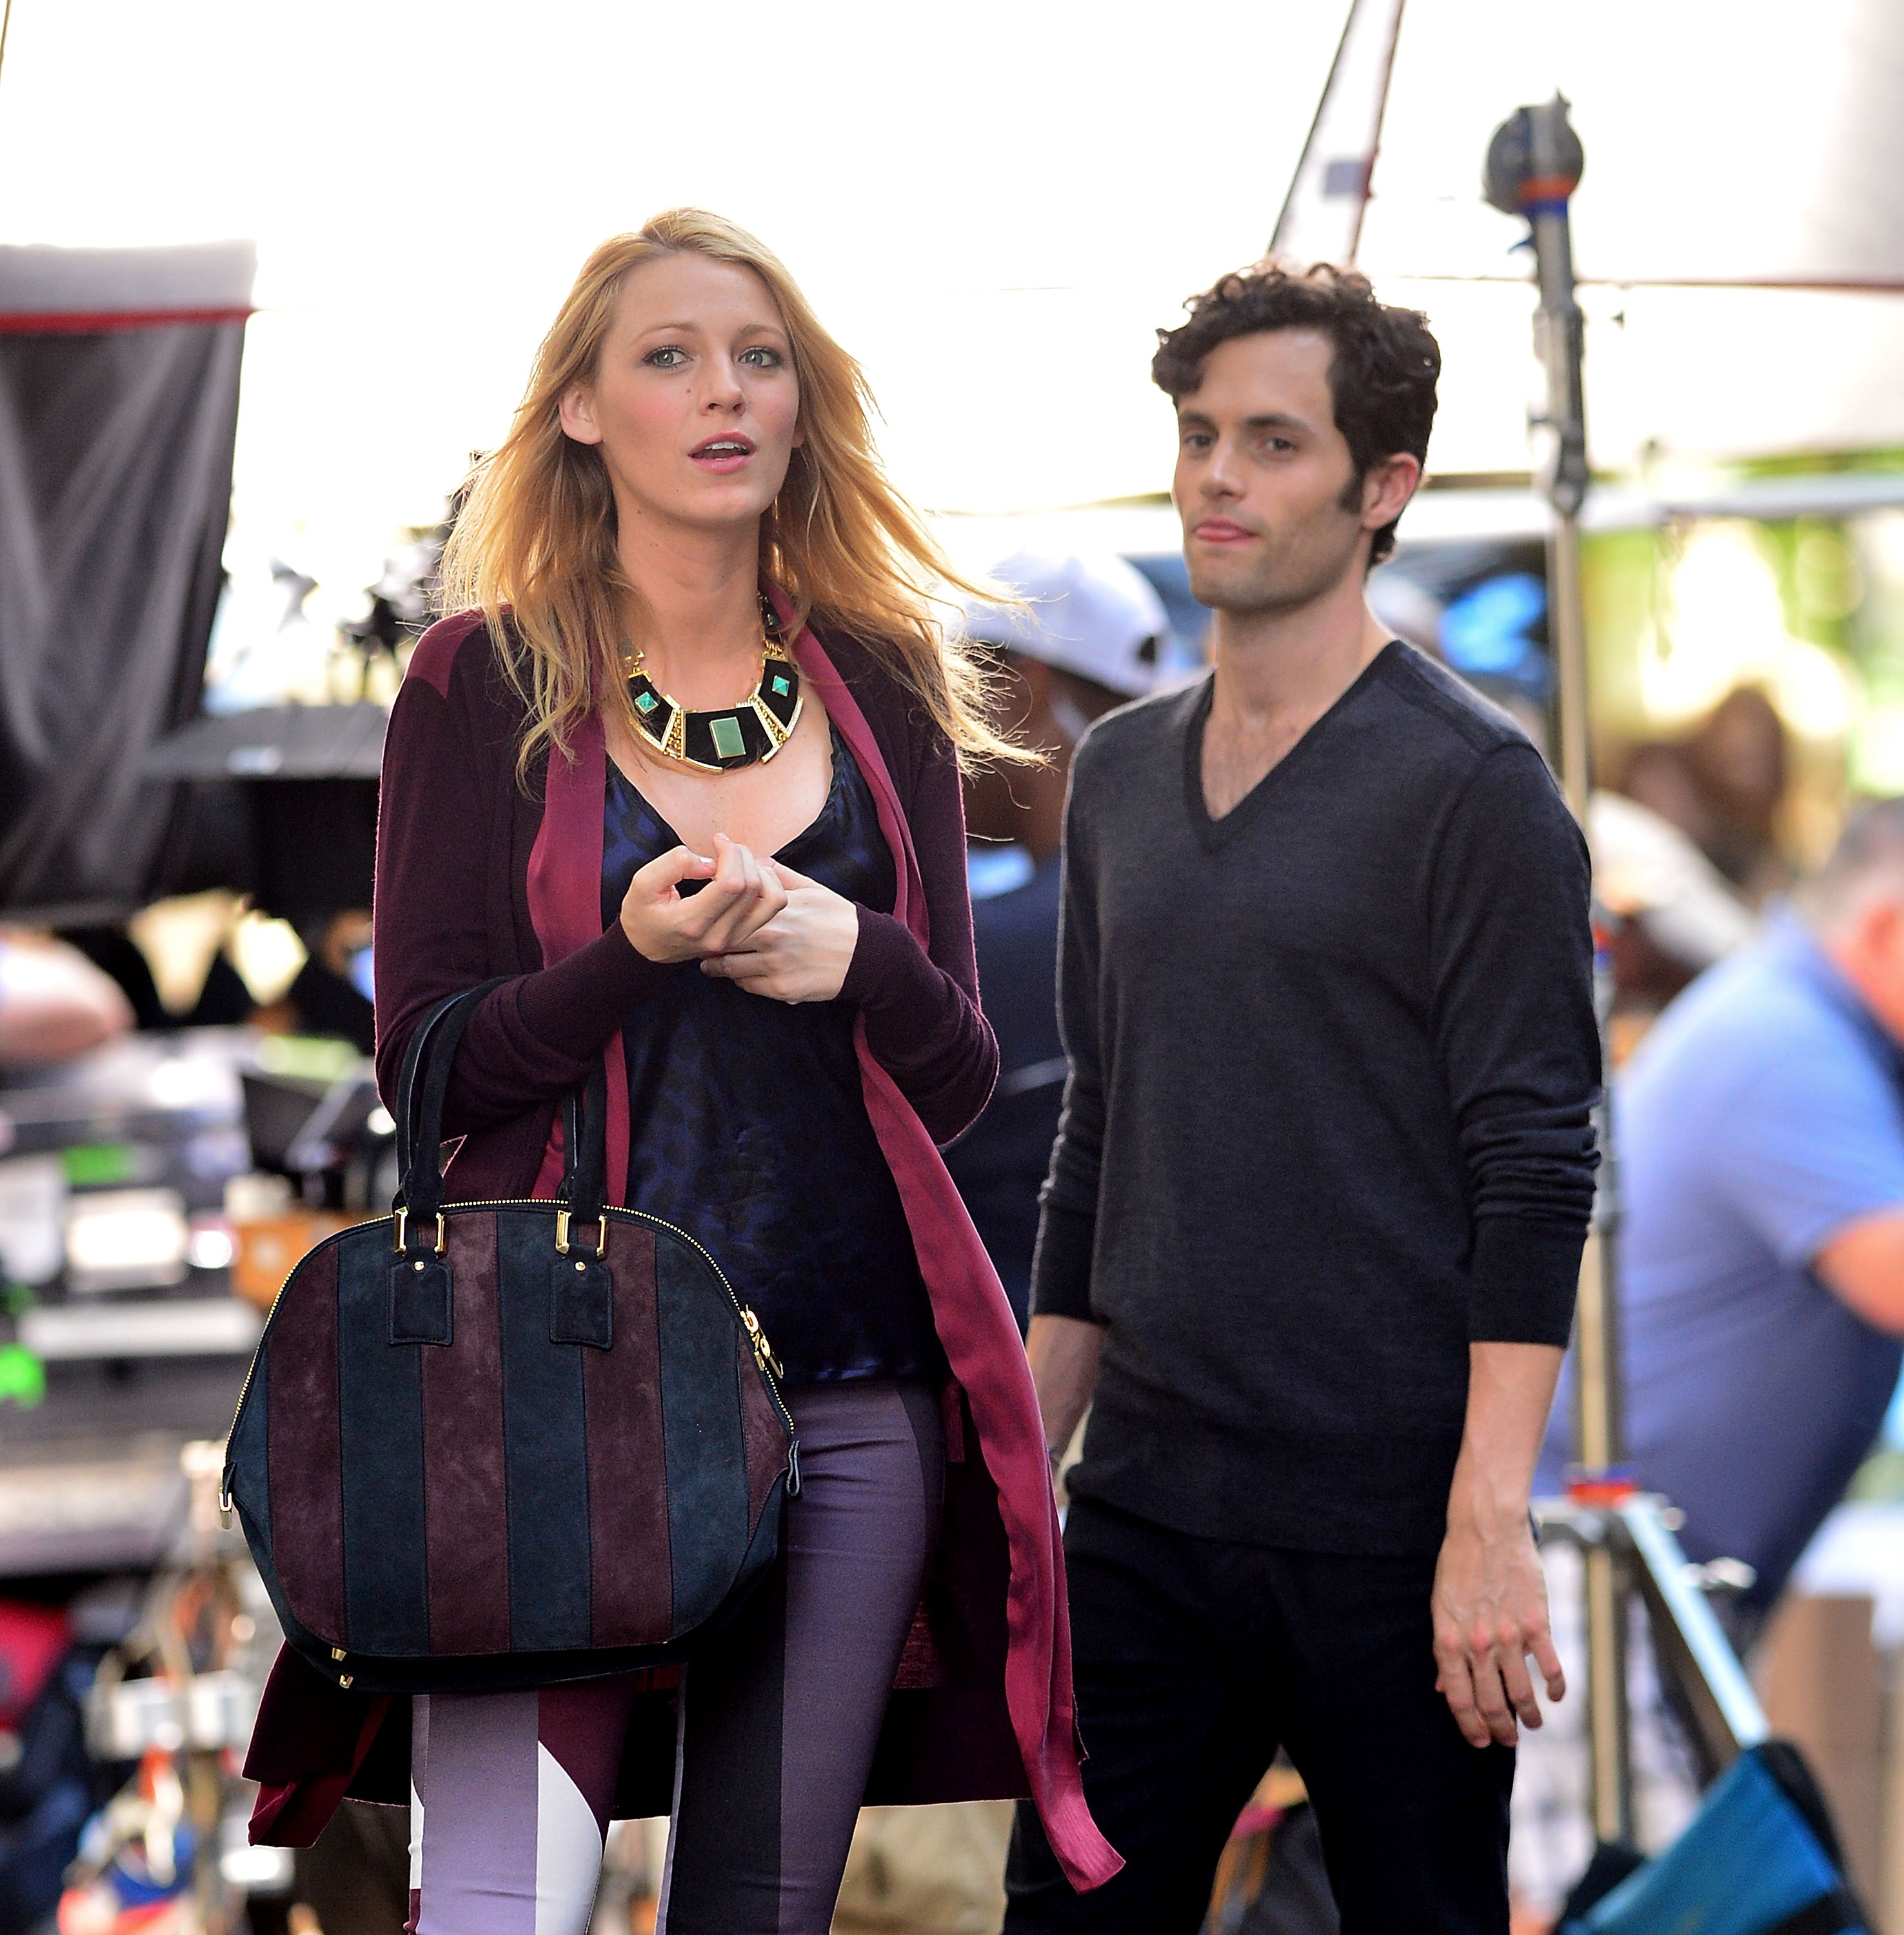 Blake Lively and Penn Badgley filming on location for "Gossip Girl" on August 28, 2012, in New York City. | Source: Getty Images